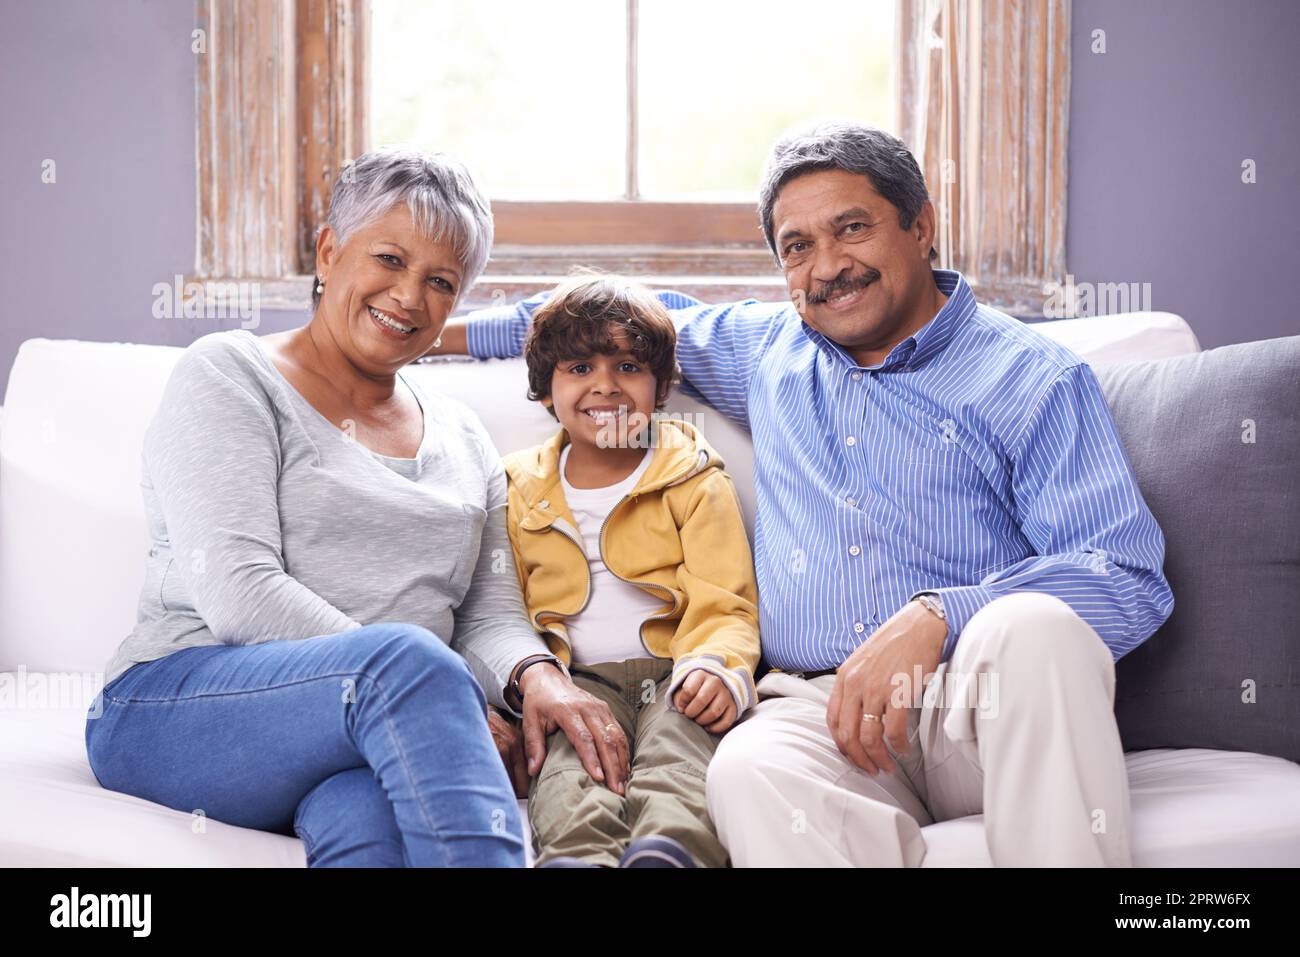 They are the best grandparents. Two grandparents sitting on a couch with their grandson. Stock Photo